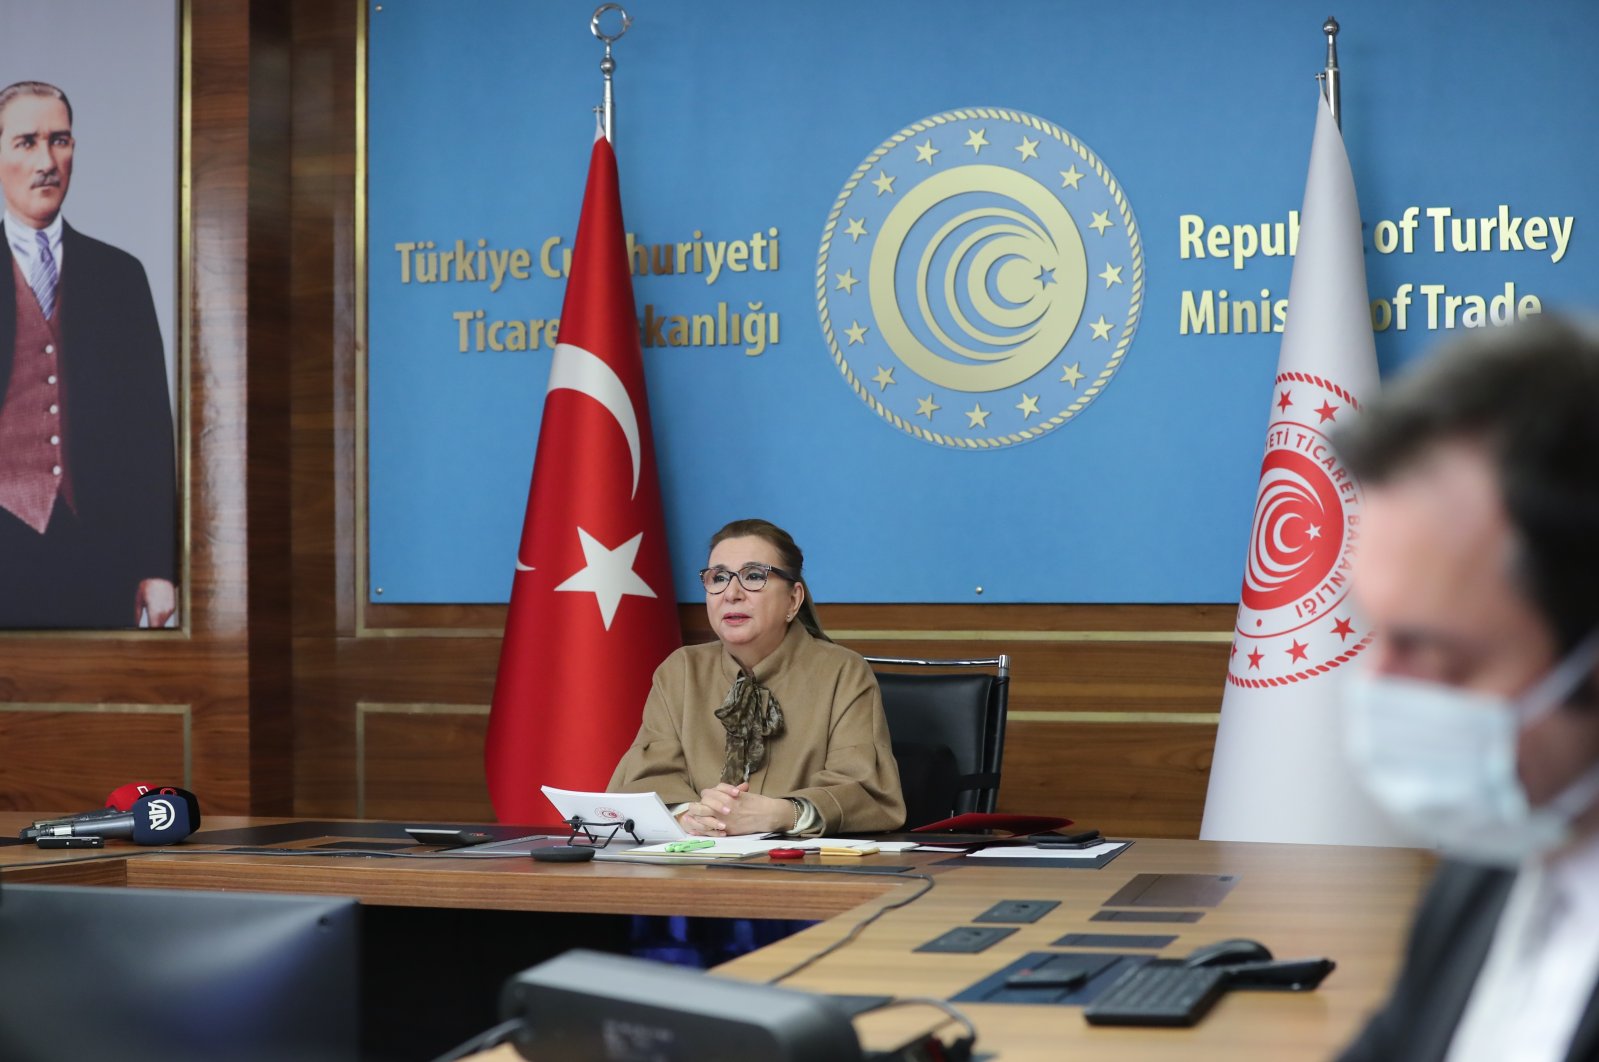 Trade Minister Ruhsar Pekcan delivers a speech during a virtual meeting of the First Conference of the Chambers of Commerce and Industry of the Member Countries of the Asian Cooperation Dialogue in the capital Ankara, Turkey, Jan. 20, 2021. (AA Photo)